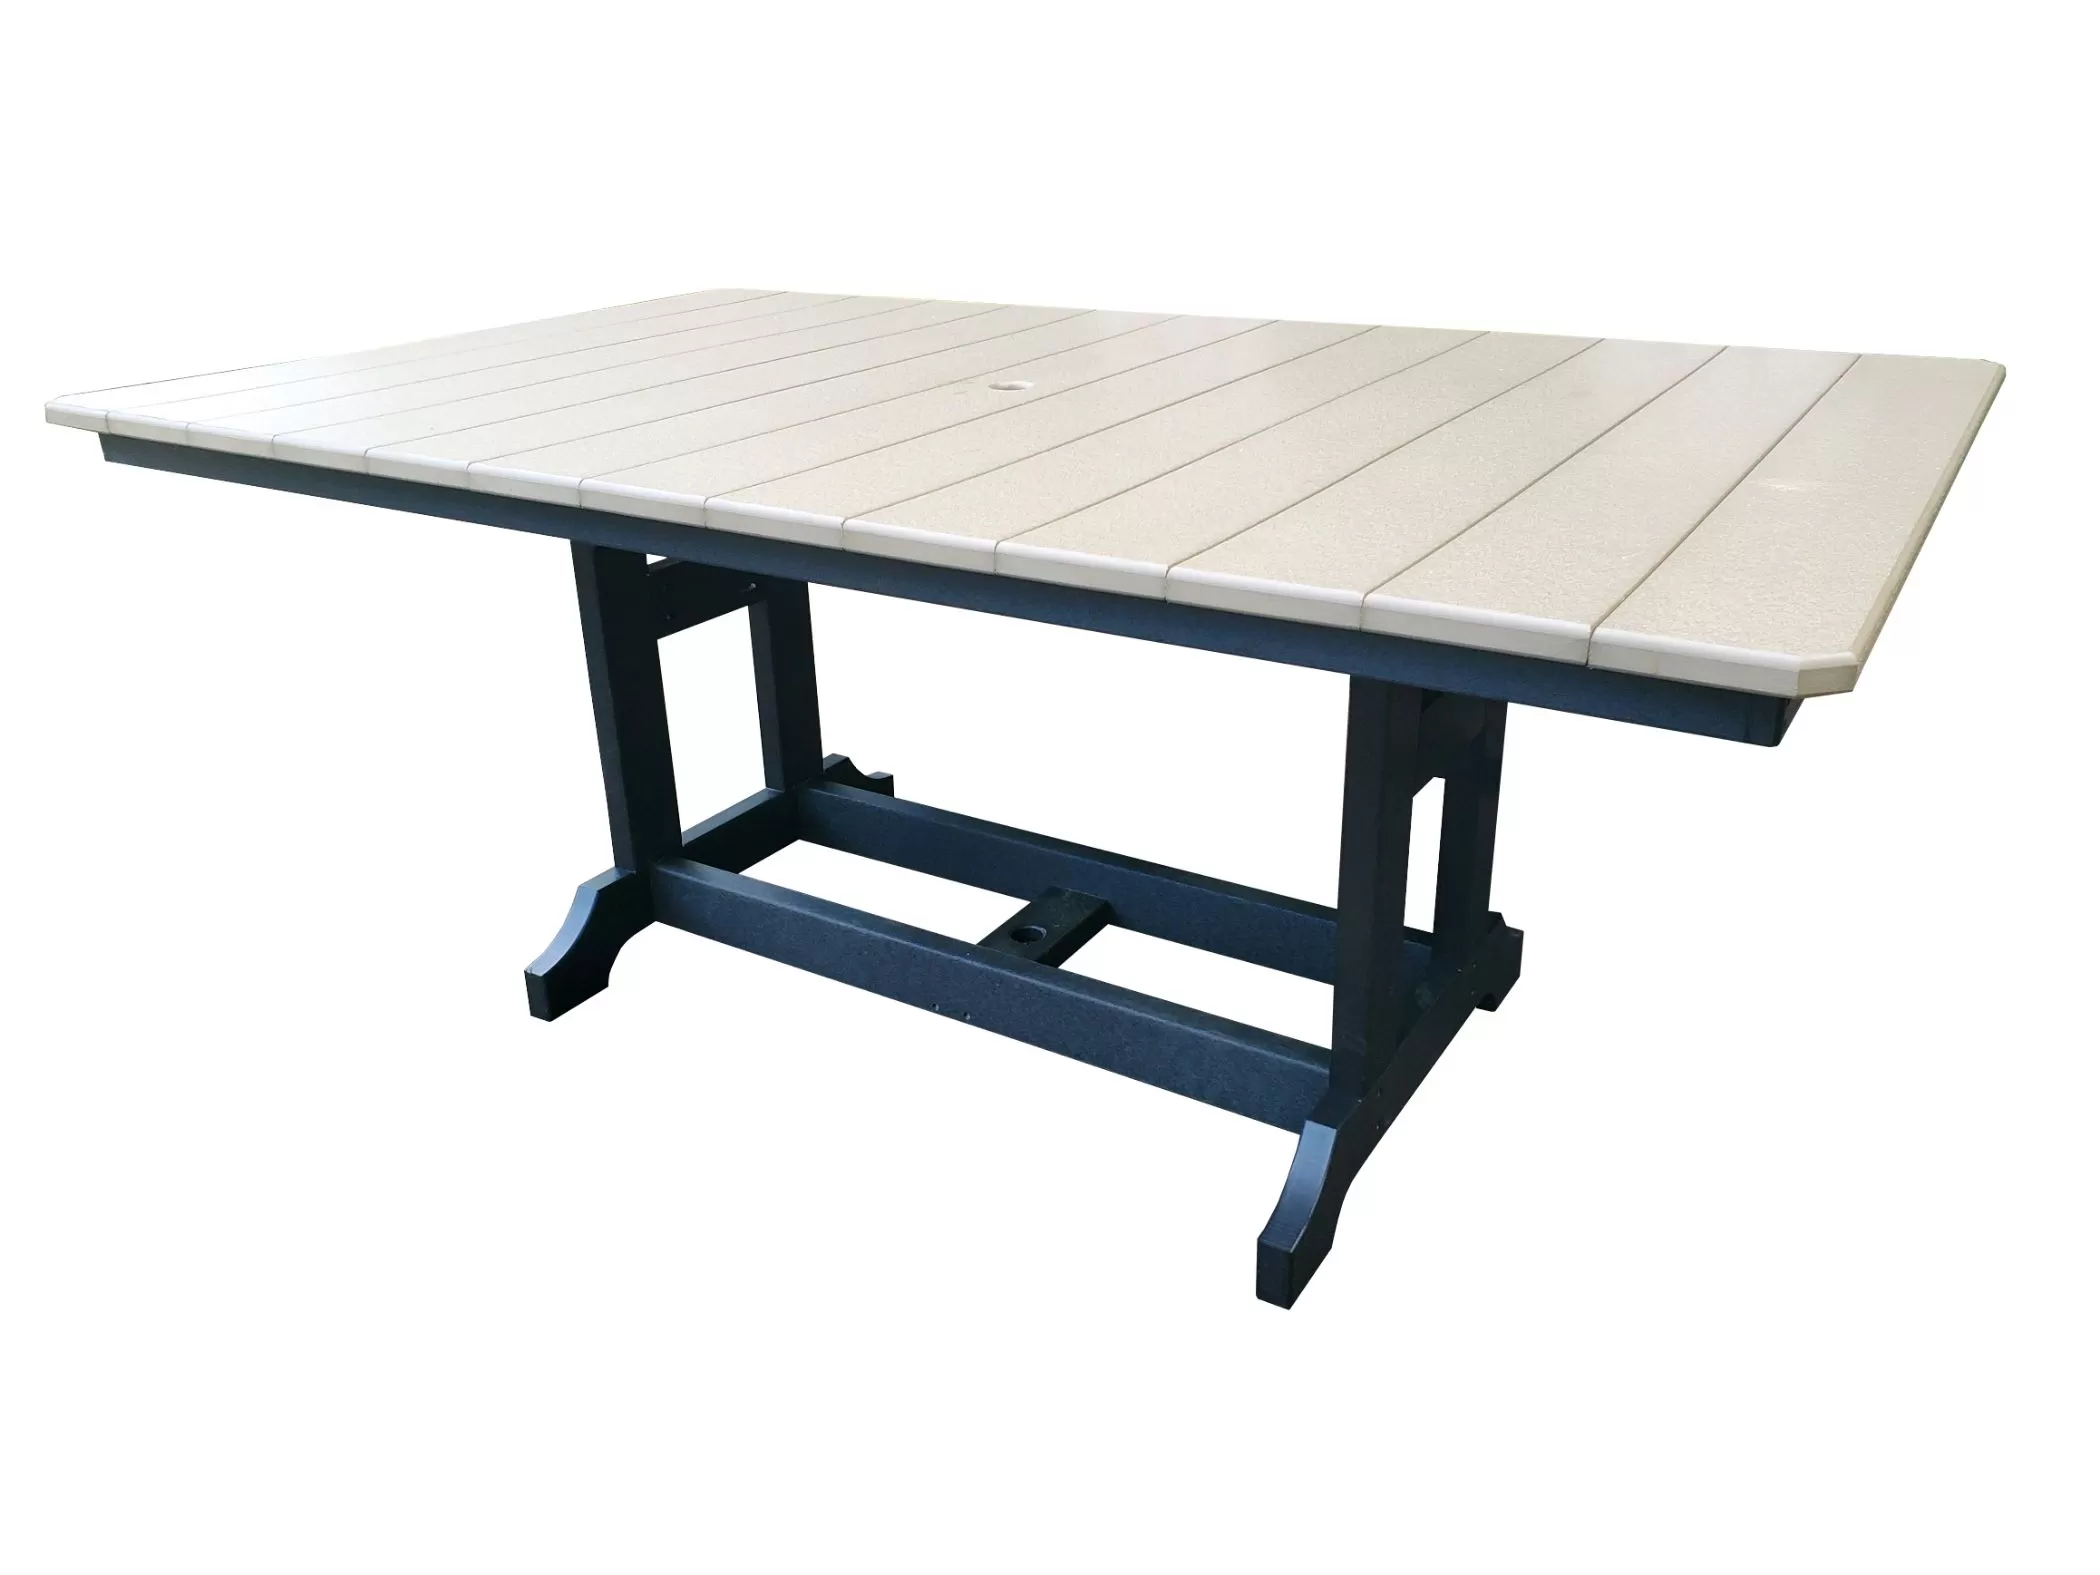 HB 44" x 72" Dining Table